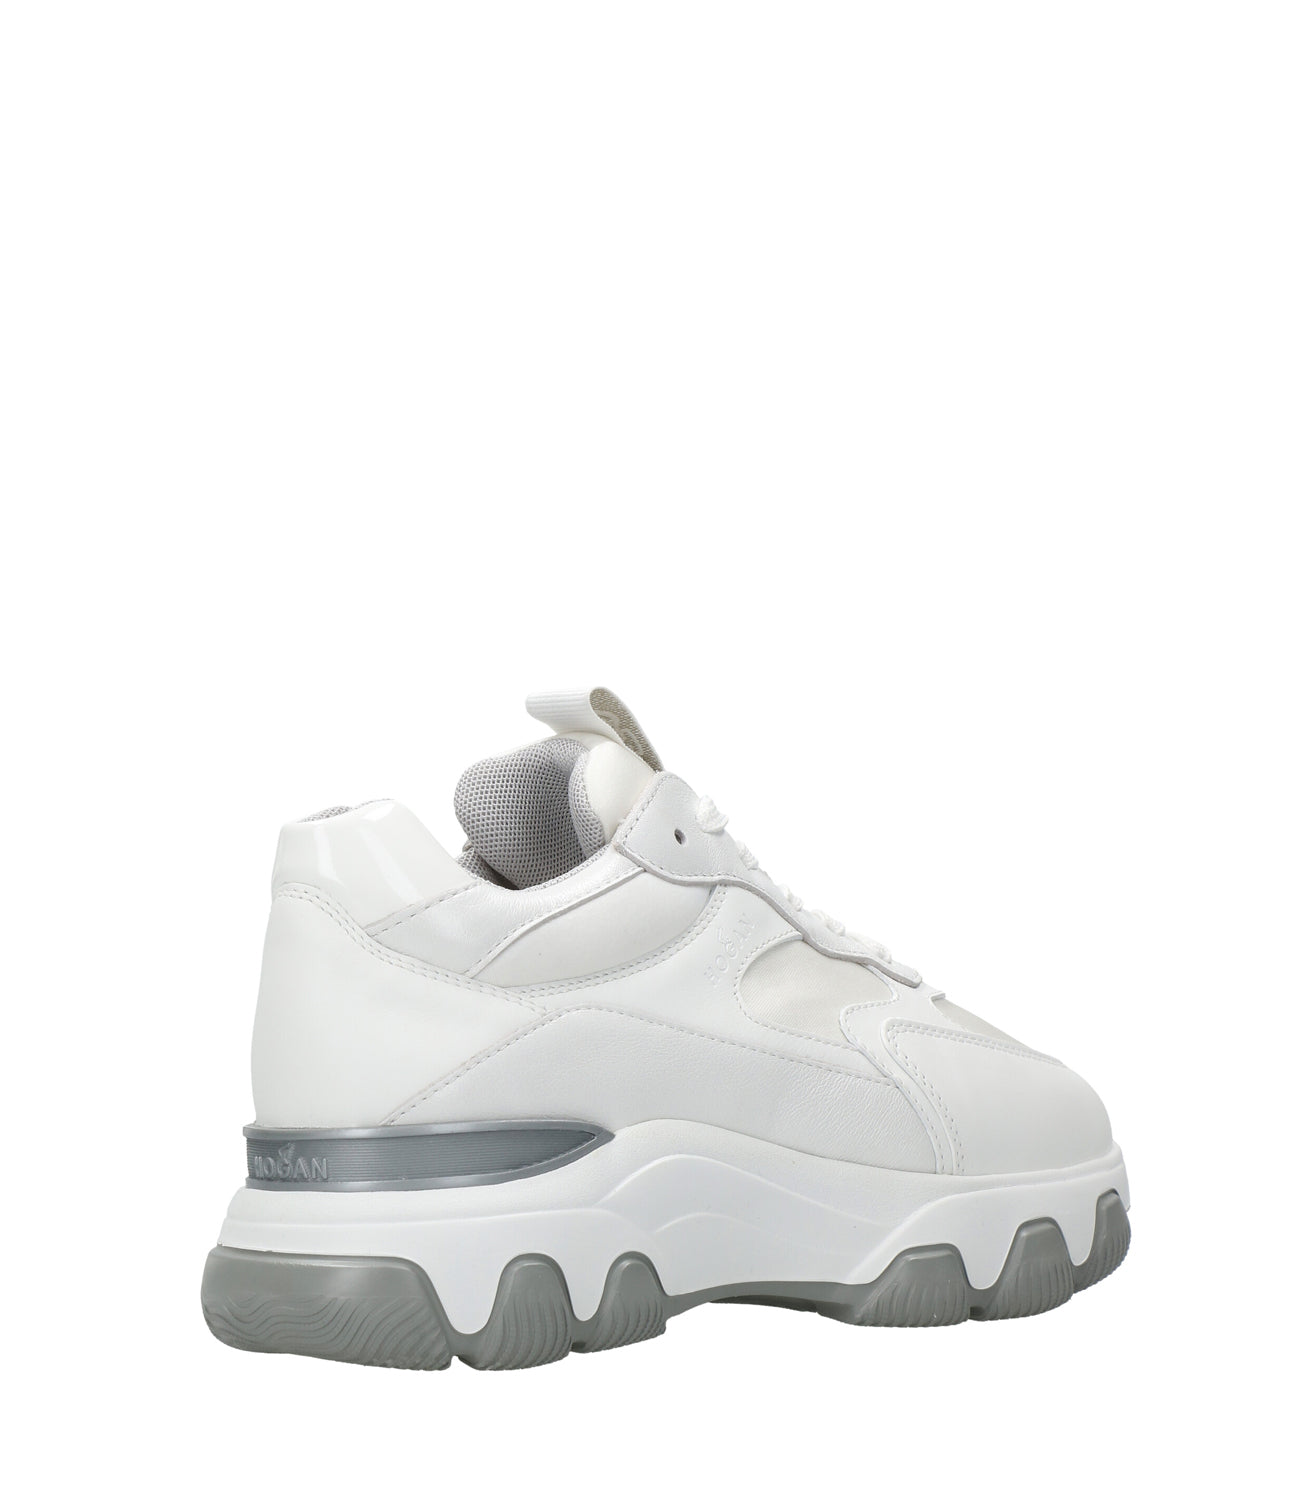 Hogan | Hyperactive Sneakers White and Silver